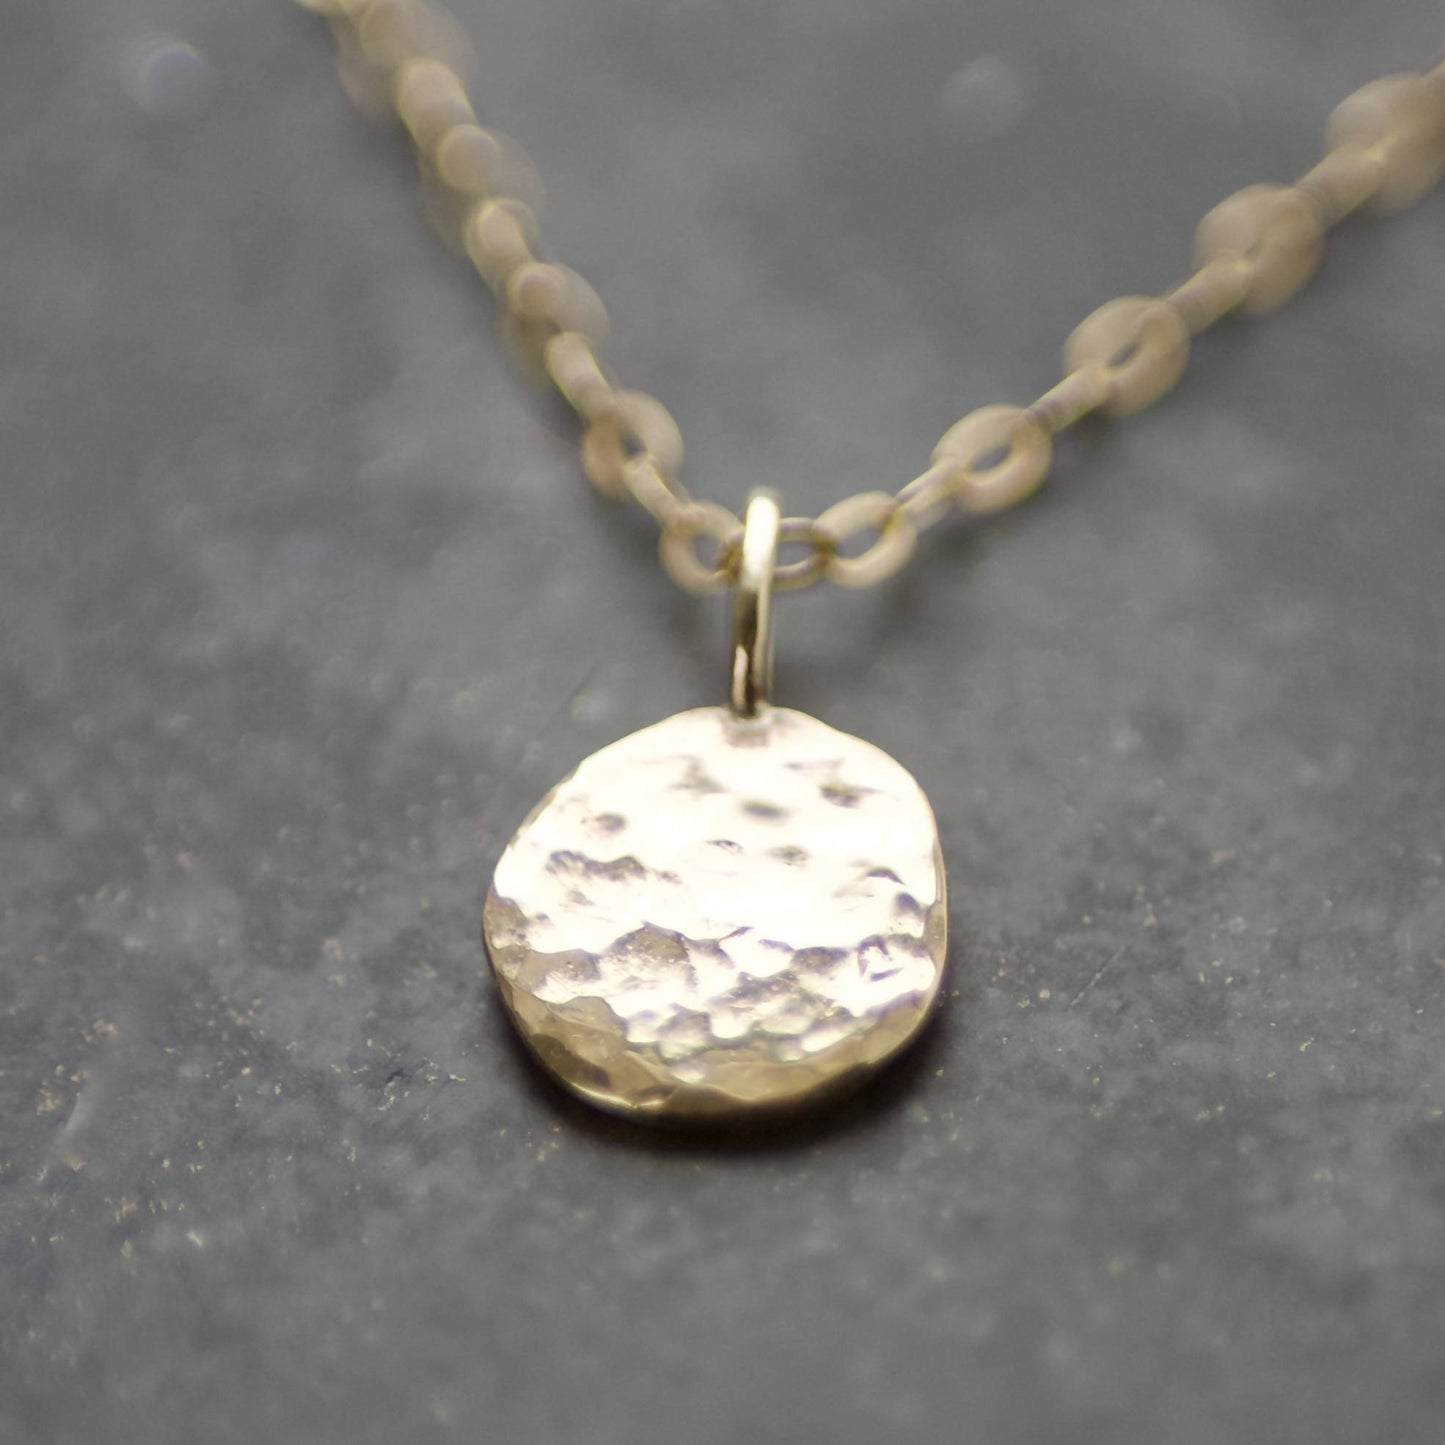 9ct Gold Hammered Disc Pendant Necklace